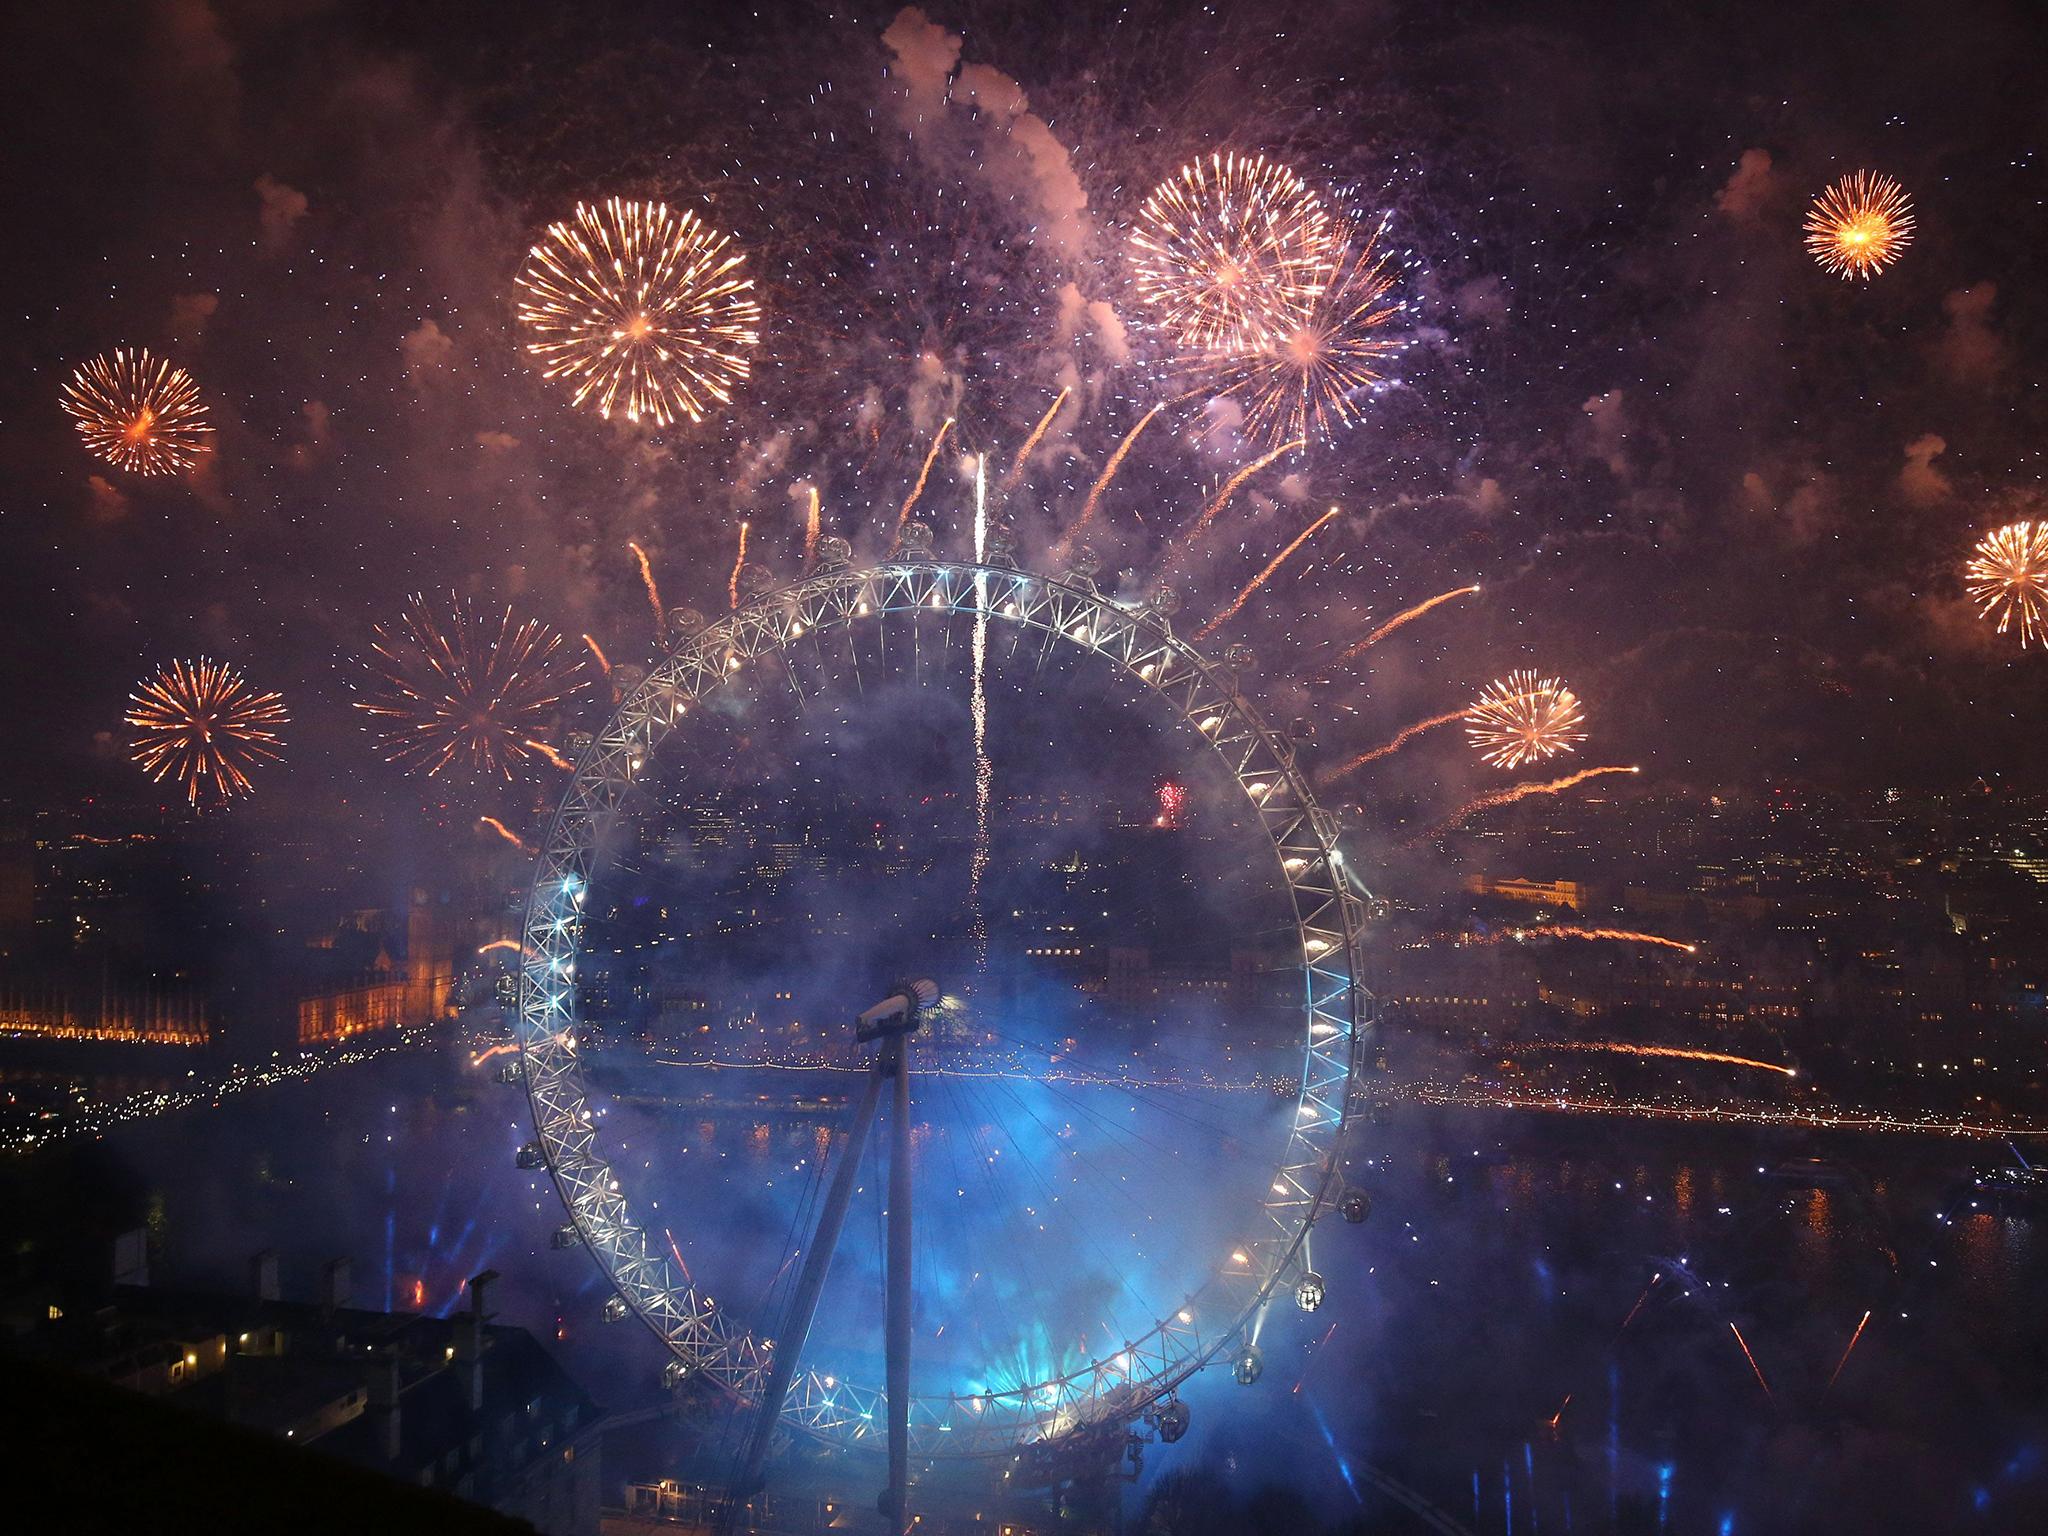 Fireworks explode around the London Eye during New Year's celebrations in central London last year